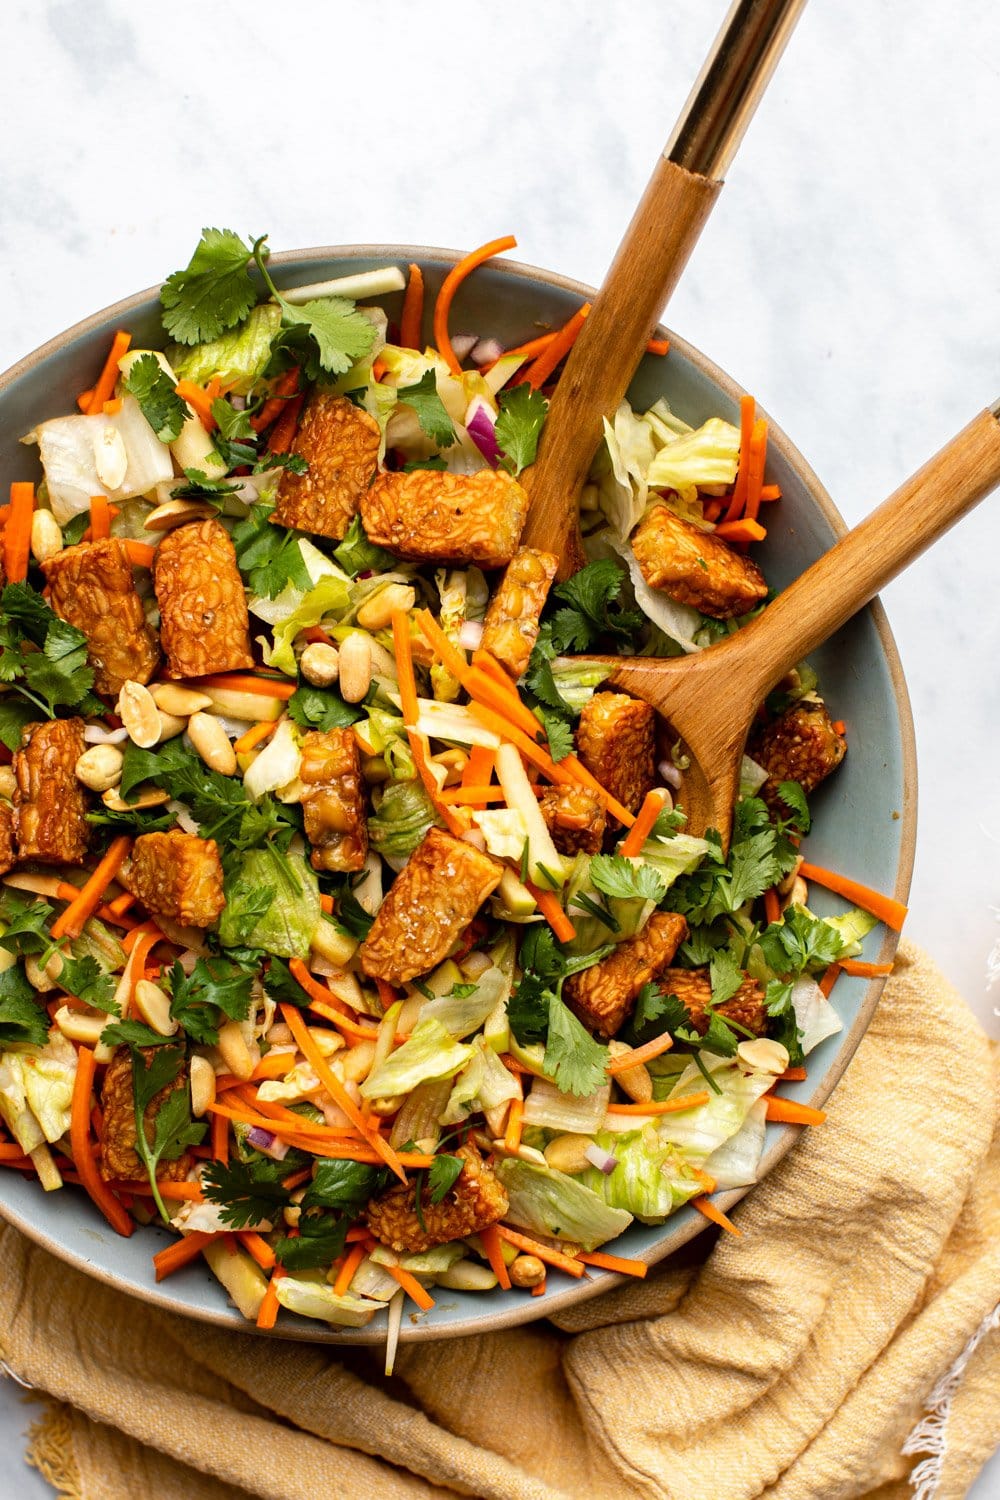 tempeh salad in large bowl with wooden serving spoons on marble countertop